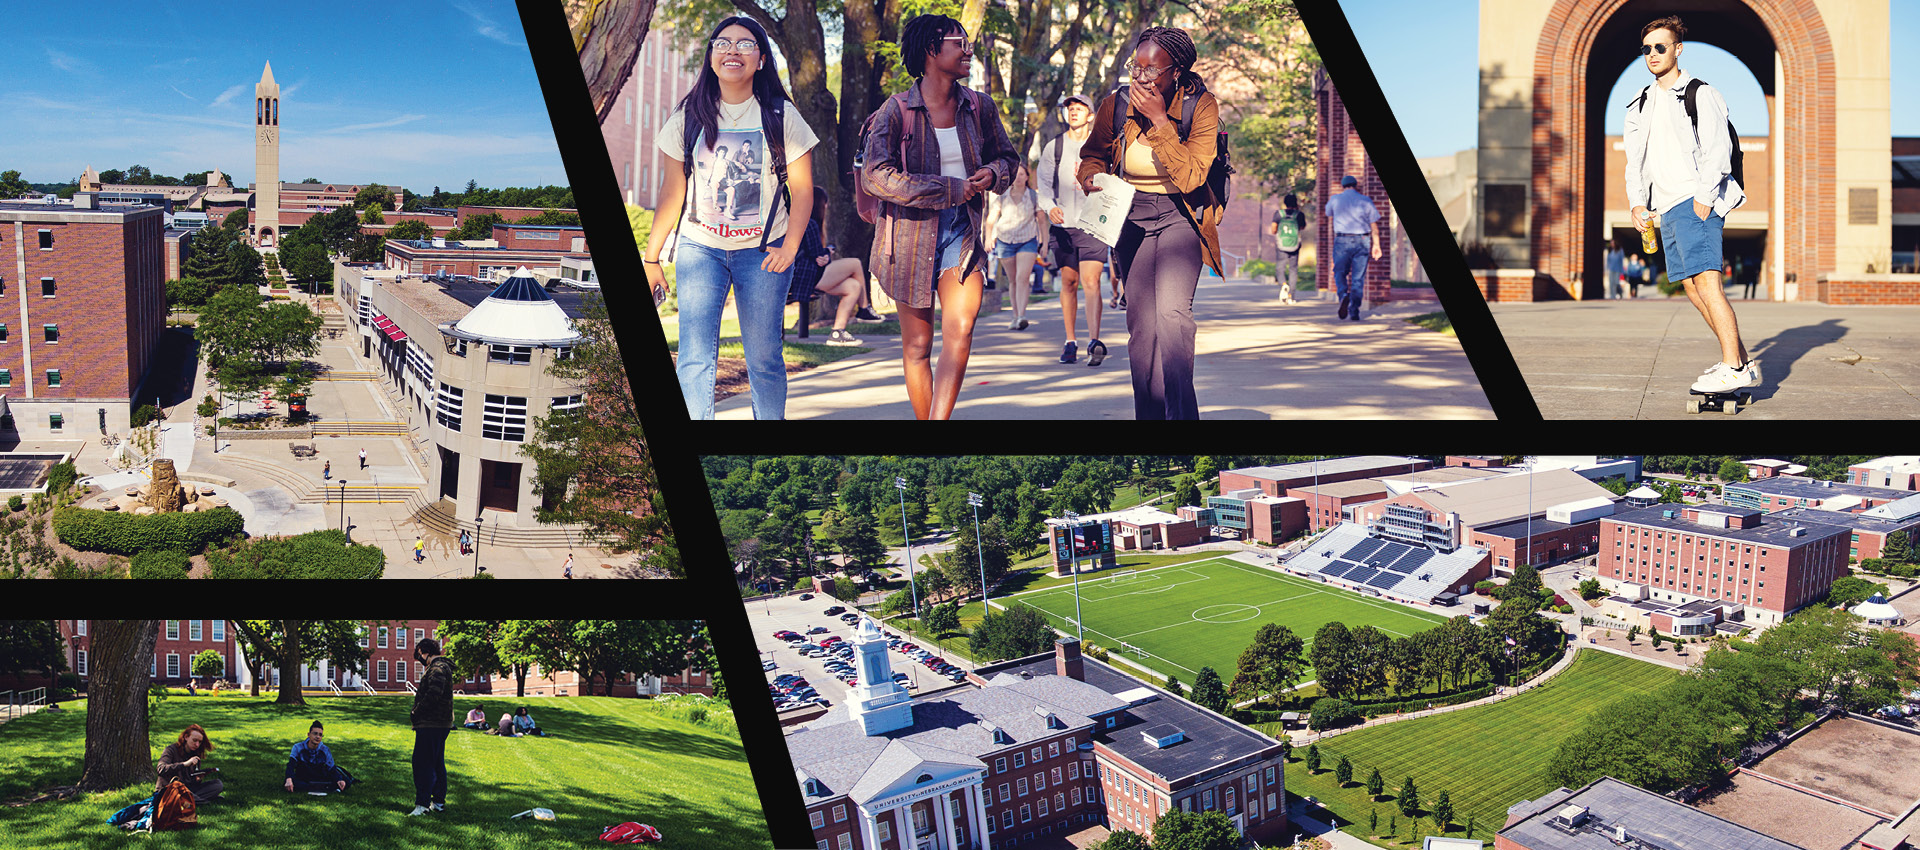 Collage of images showcasing different parts of campus and students on campus.